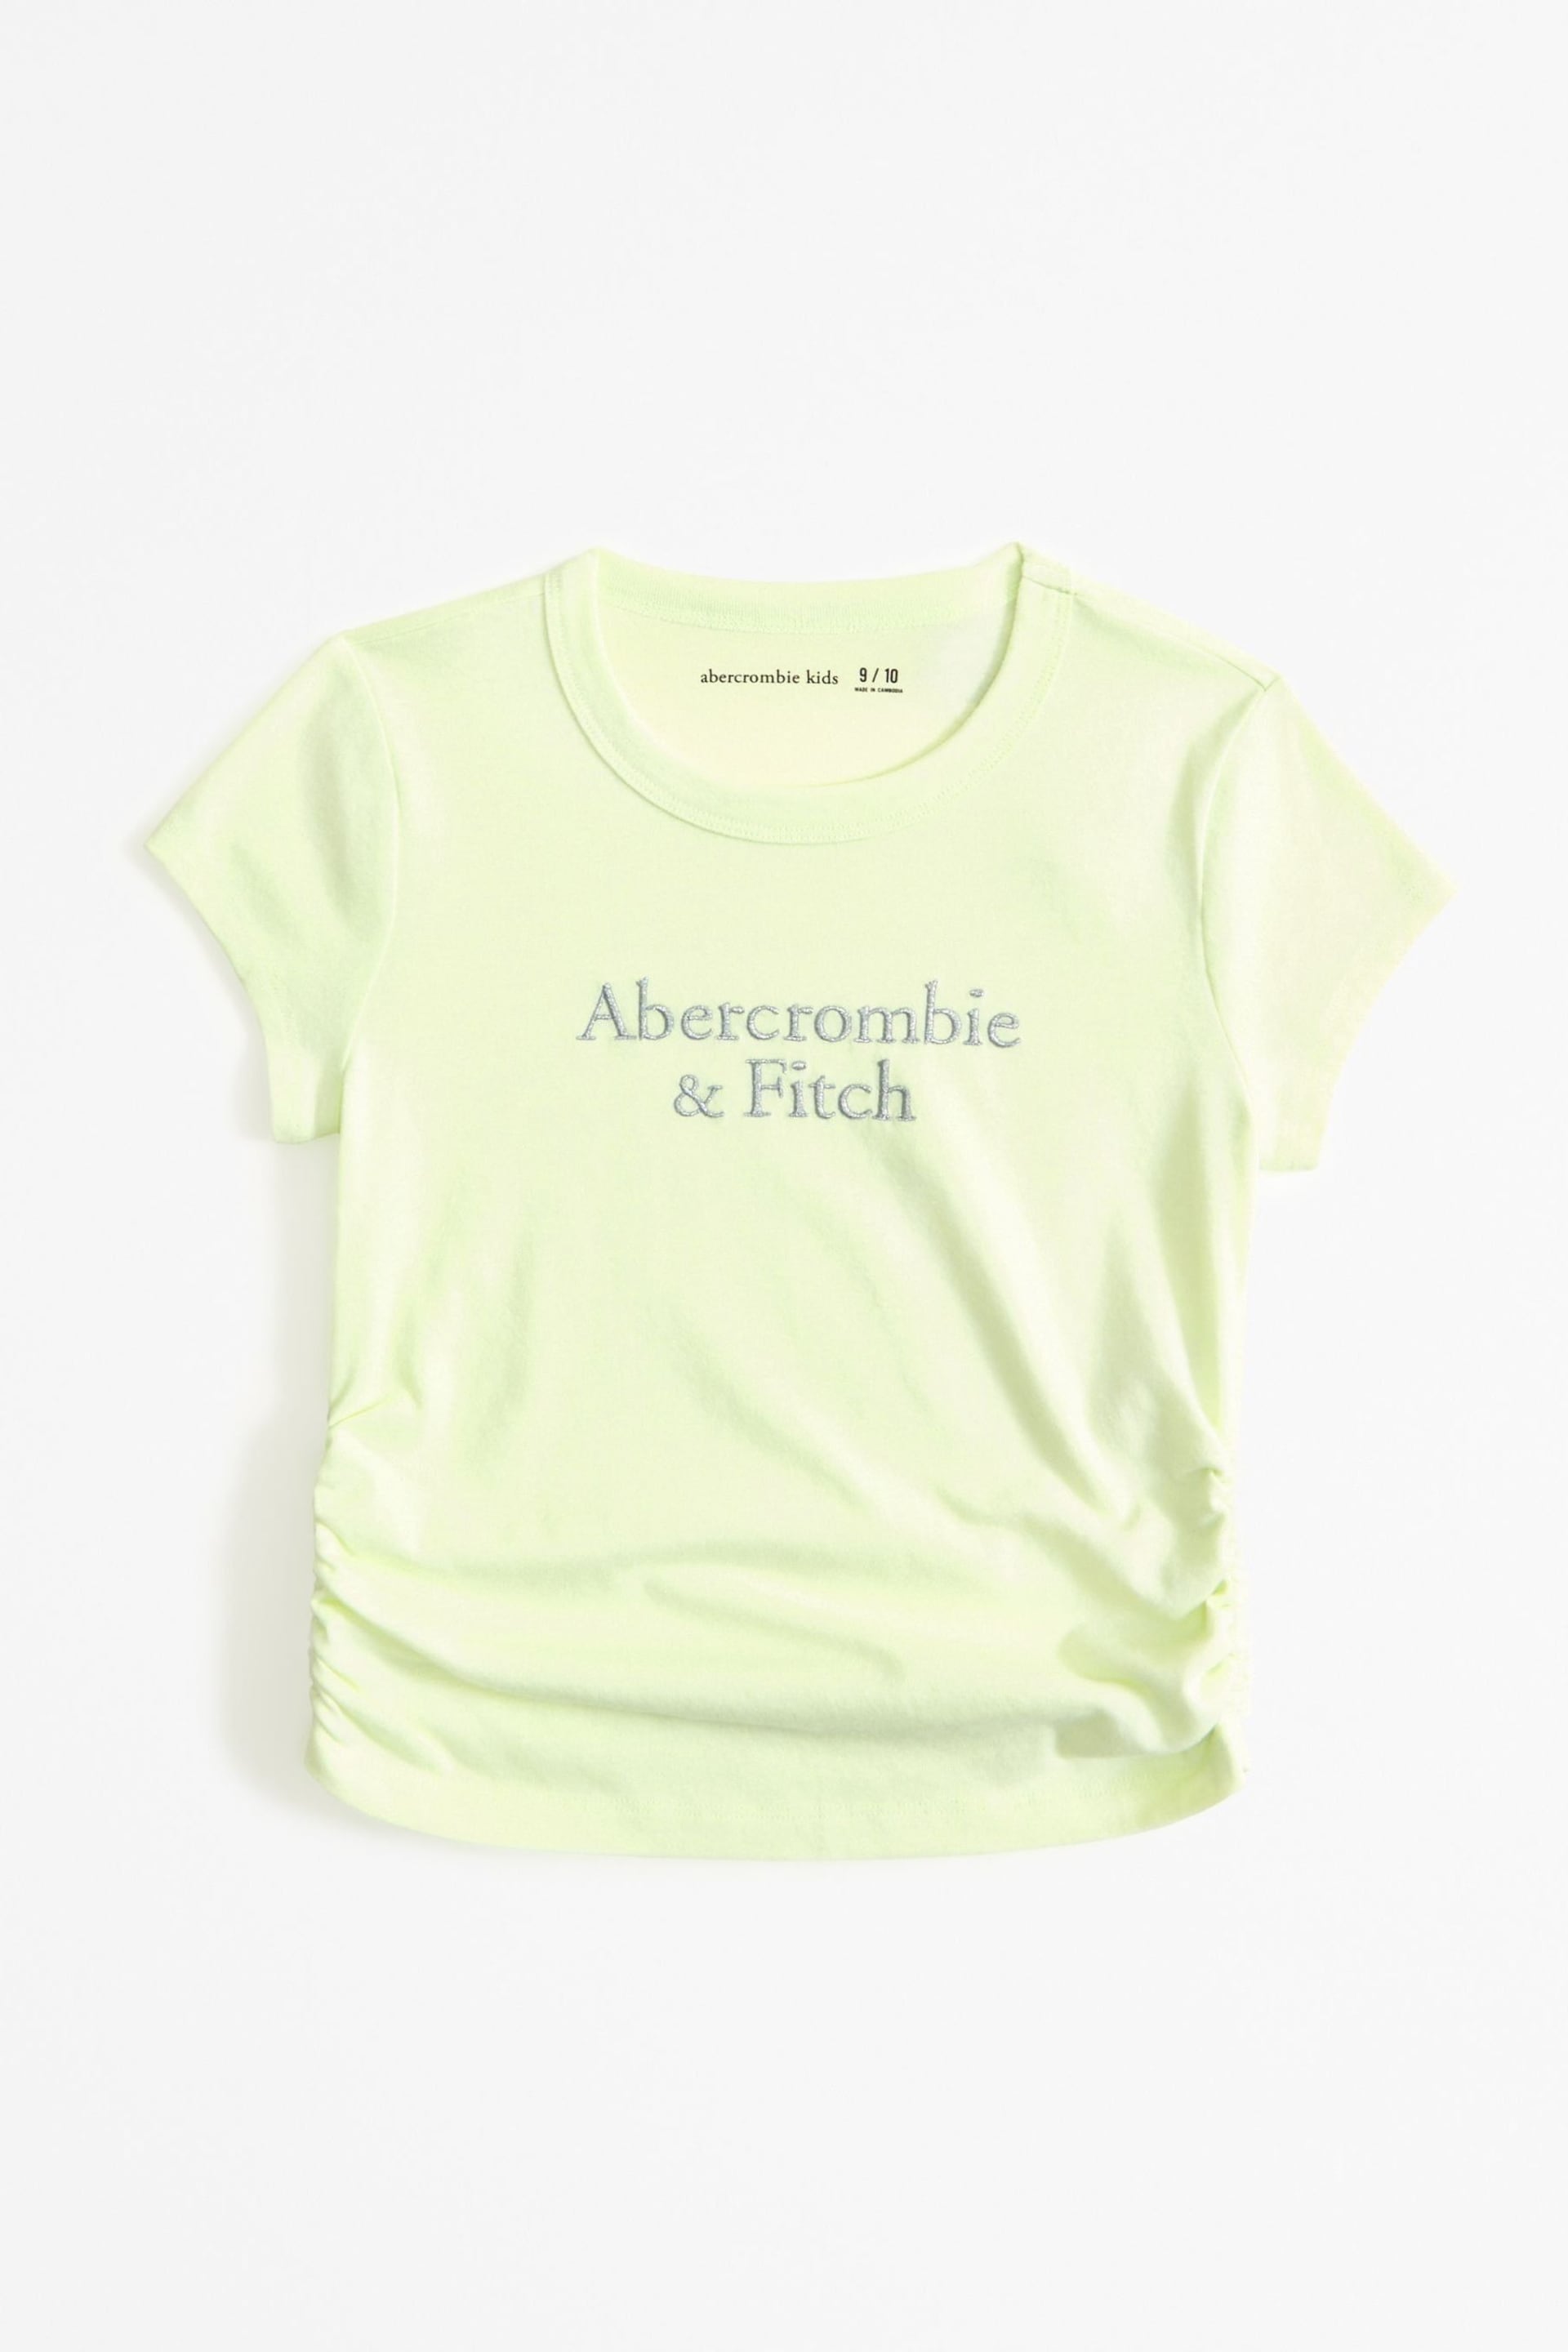 Abercrombie & Fitch Baby Yellow Cropped Short  Sleeve T-Shirt - Image 1 of 2